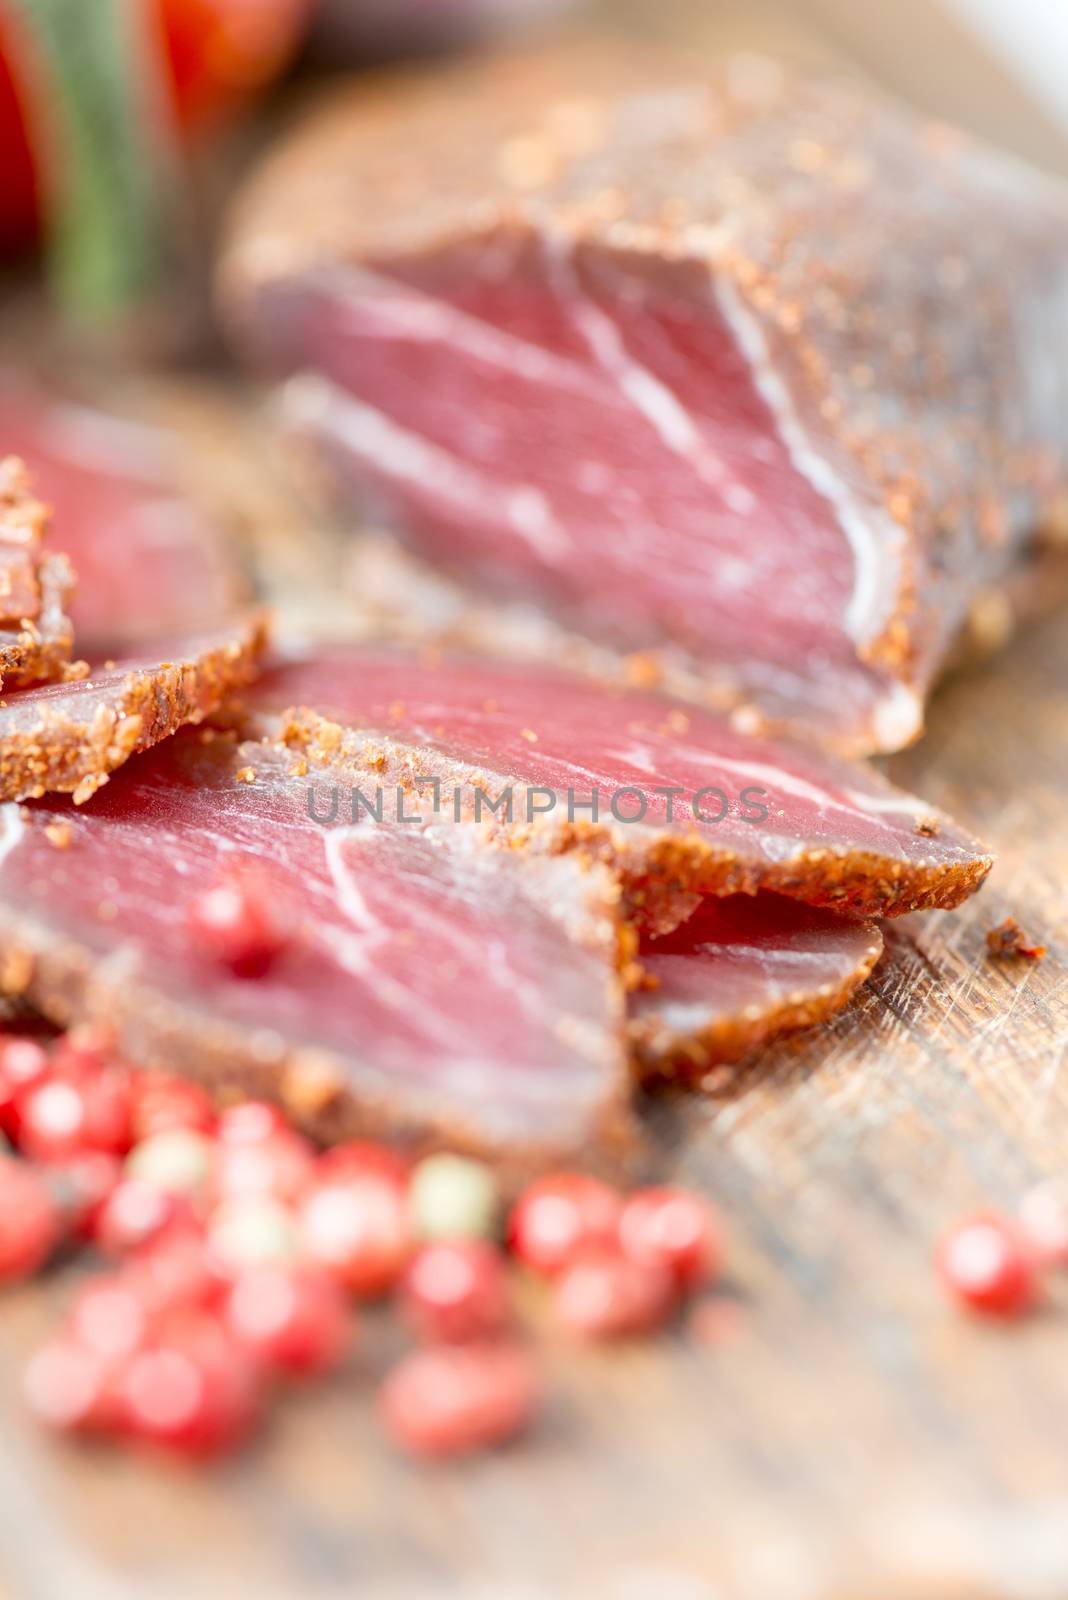 Prosciutto slices, pepper corn and tomatoes on wooden table